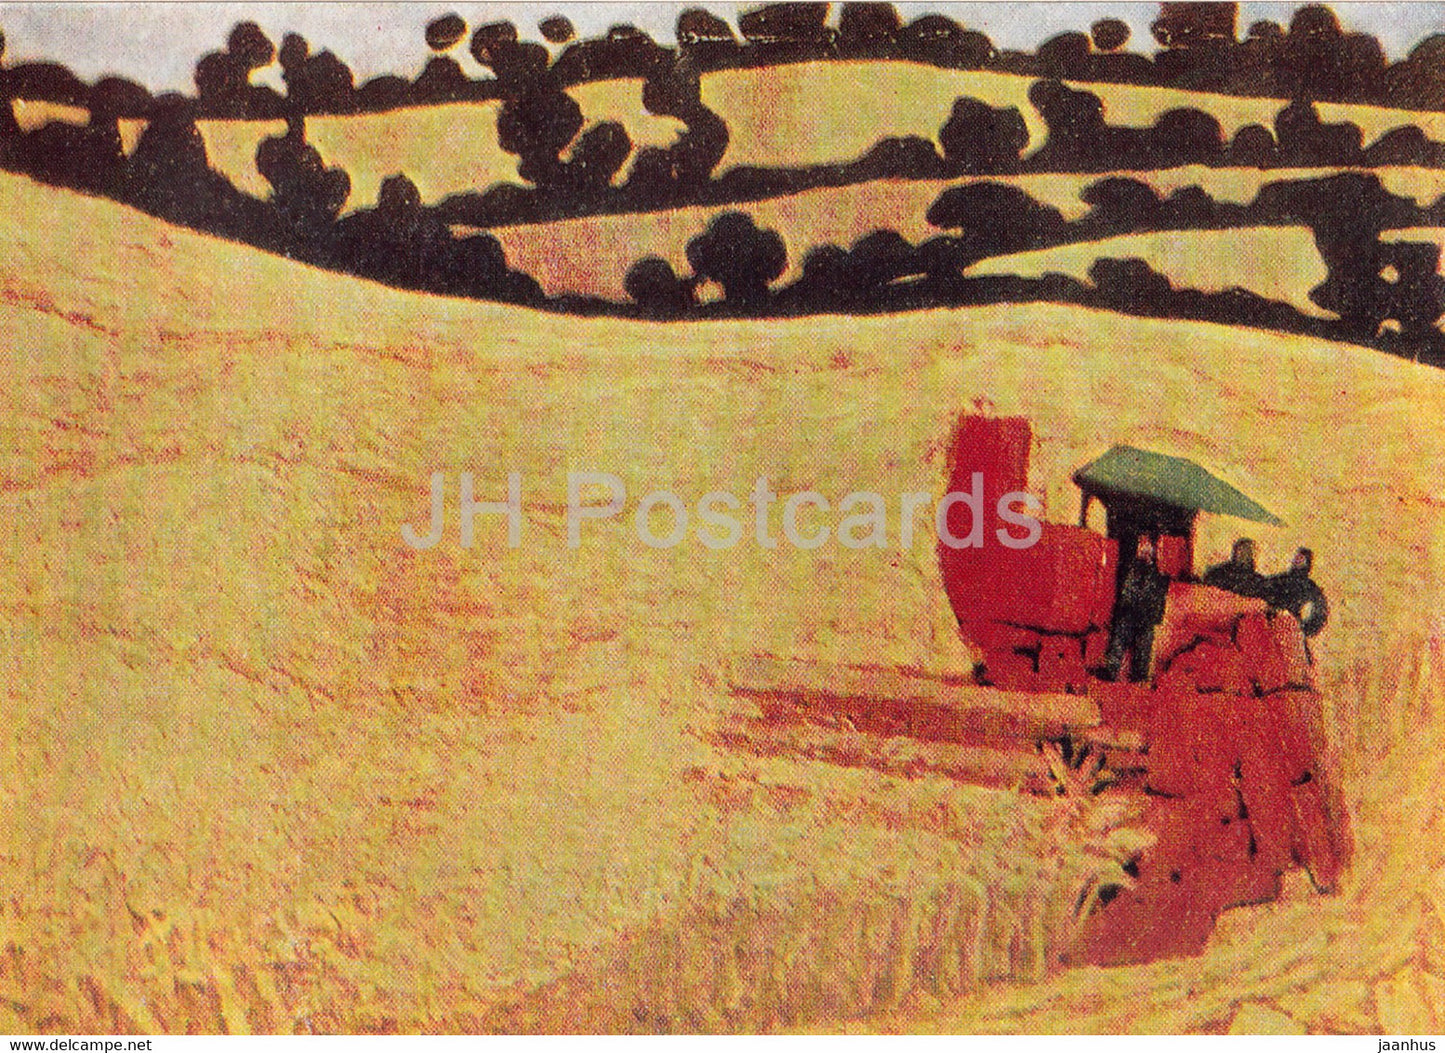 painting by Andre Fougeron - Mechanical Harvest - harvester - French art - 1967 - Russia USSR - unused - JH Postcards